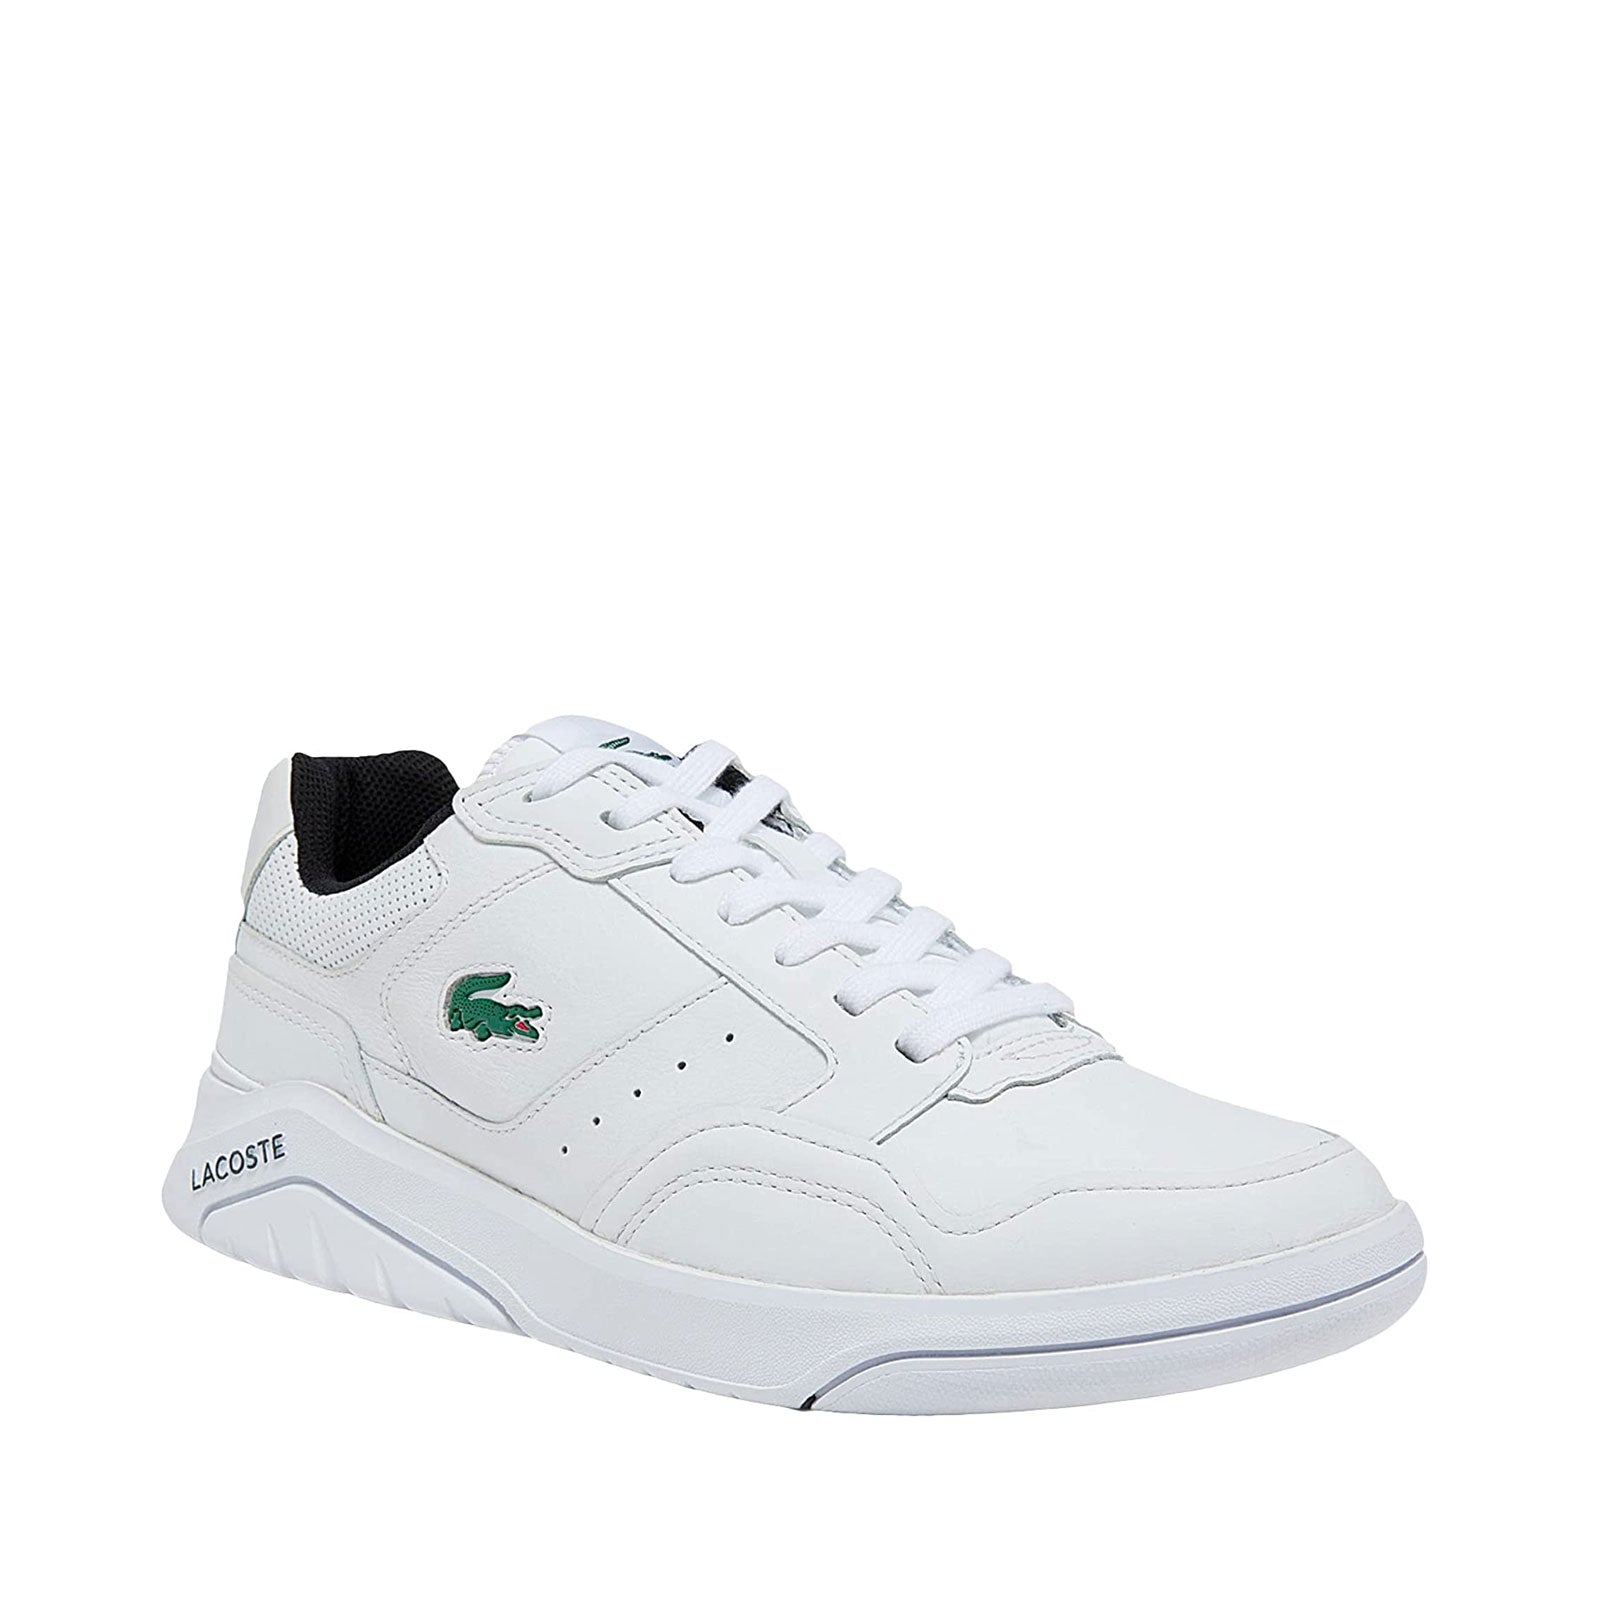 Lacoste Game Advance Luxe Men's Shoes White-Blue